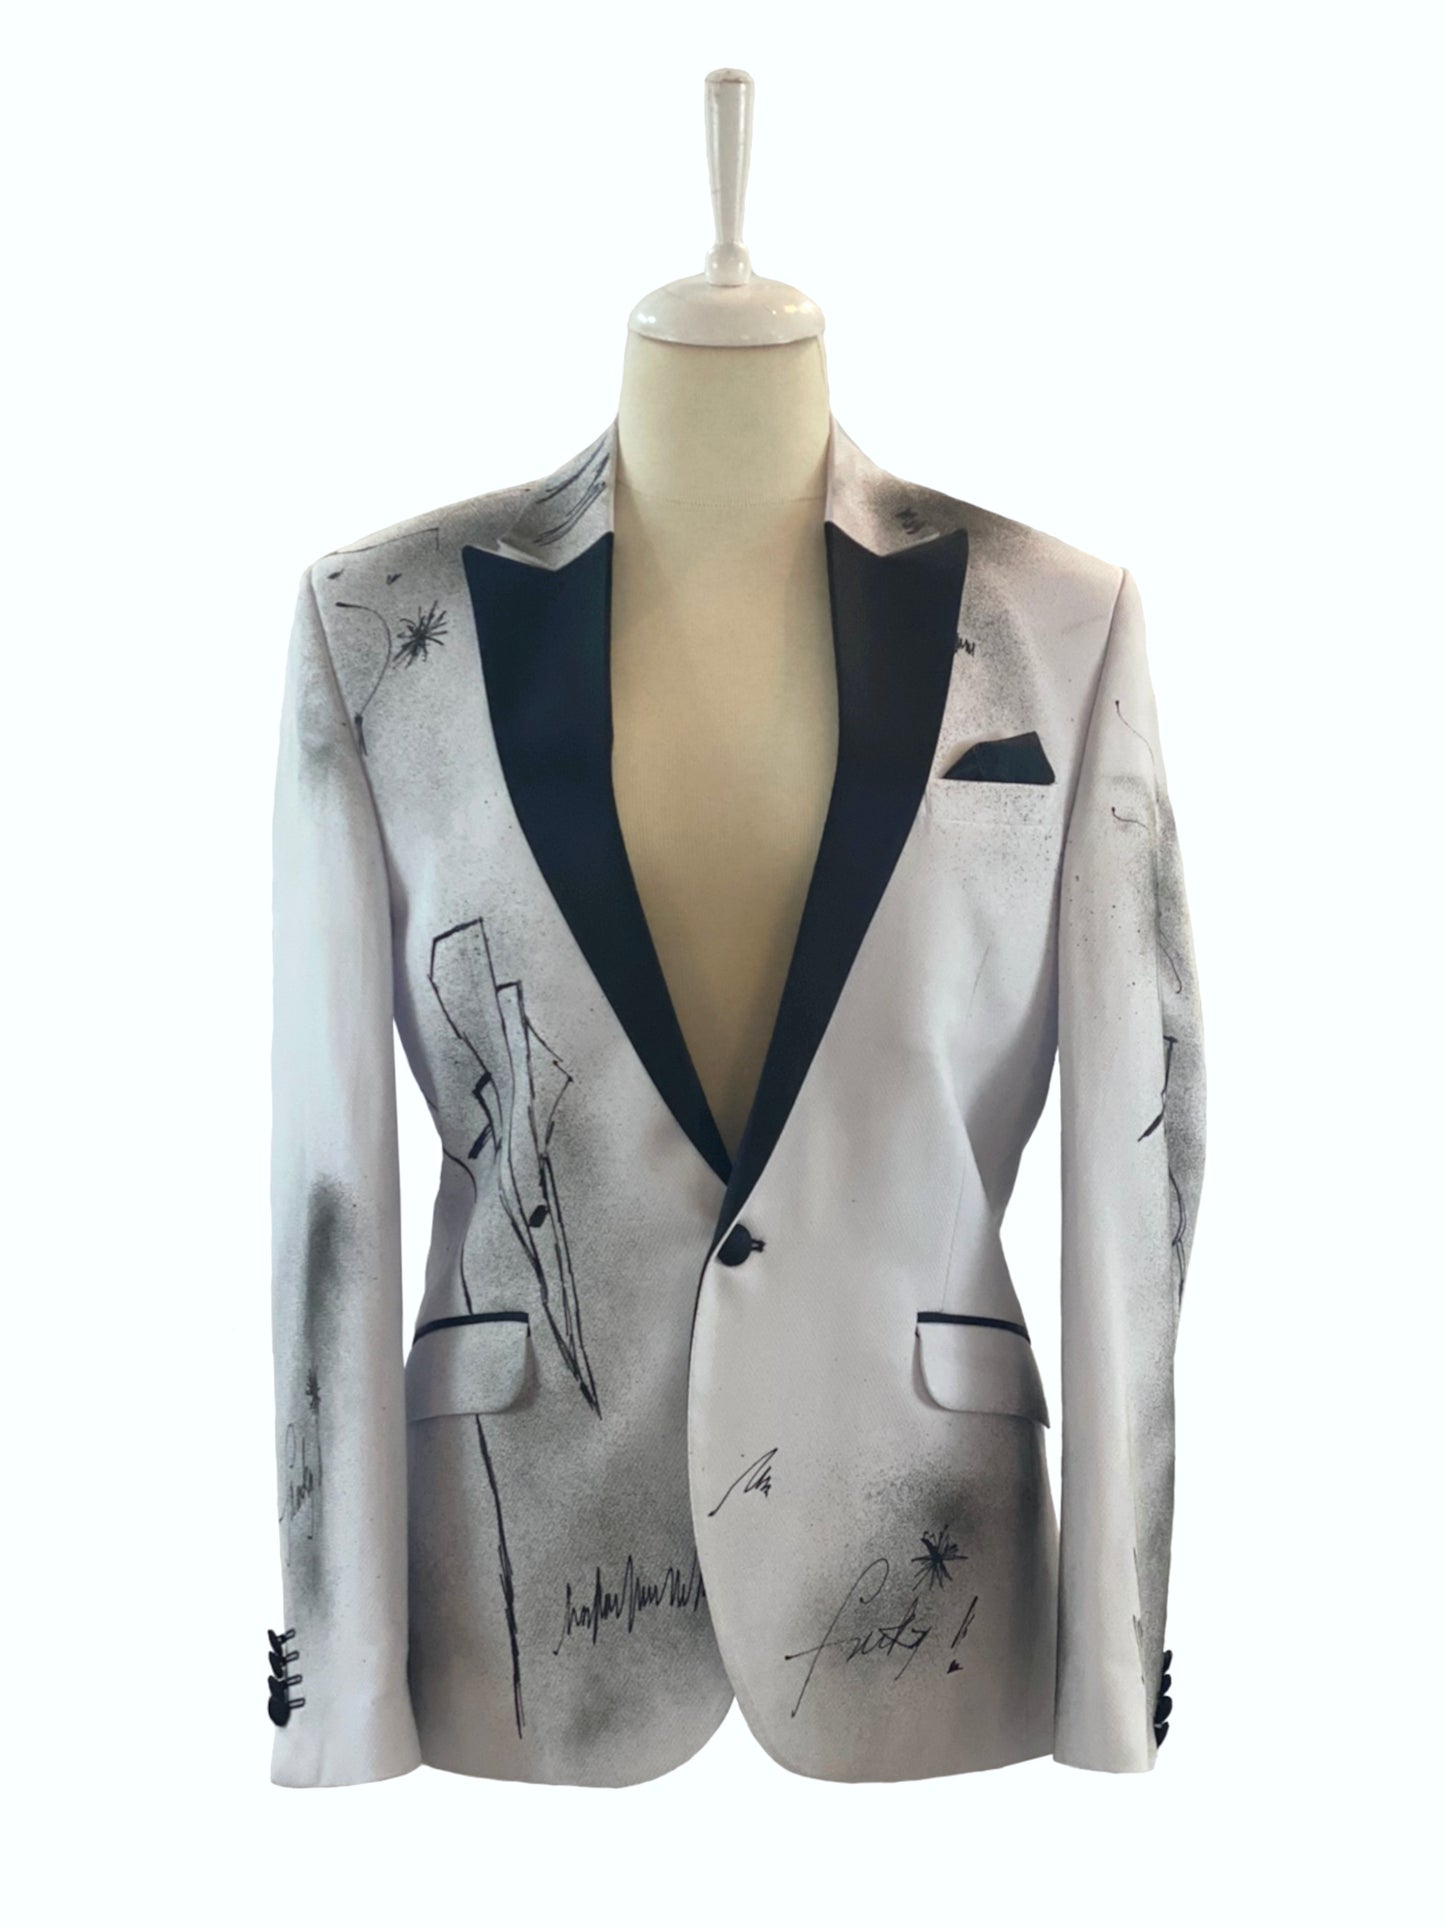 Unisex White Jacket with Handpainted Details